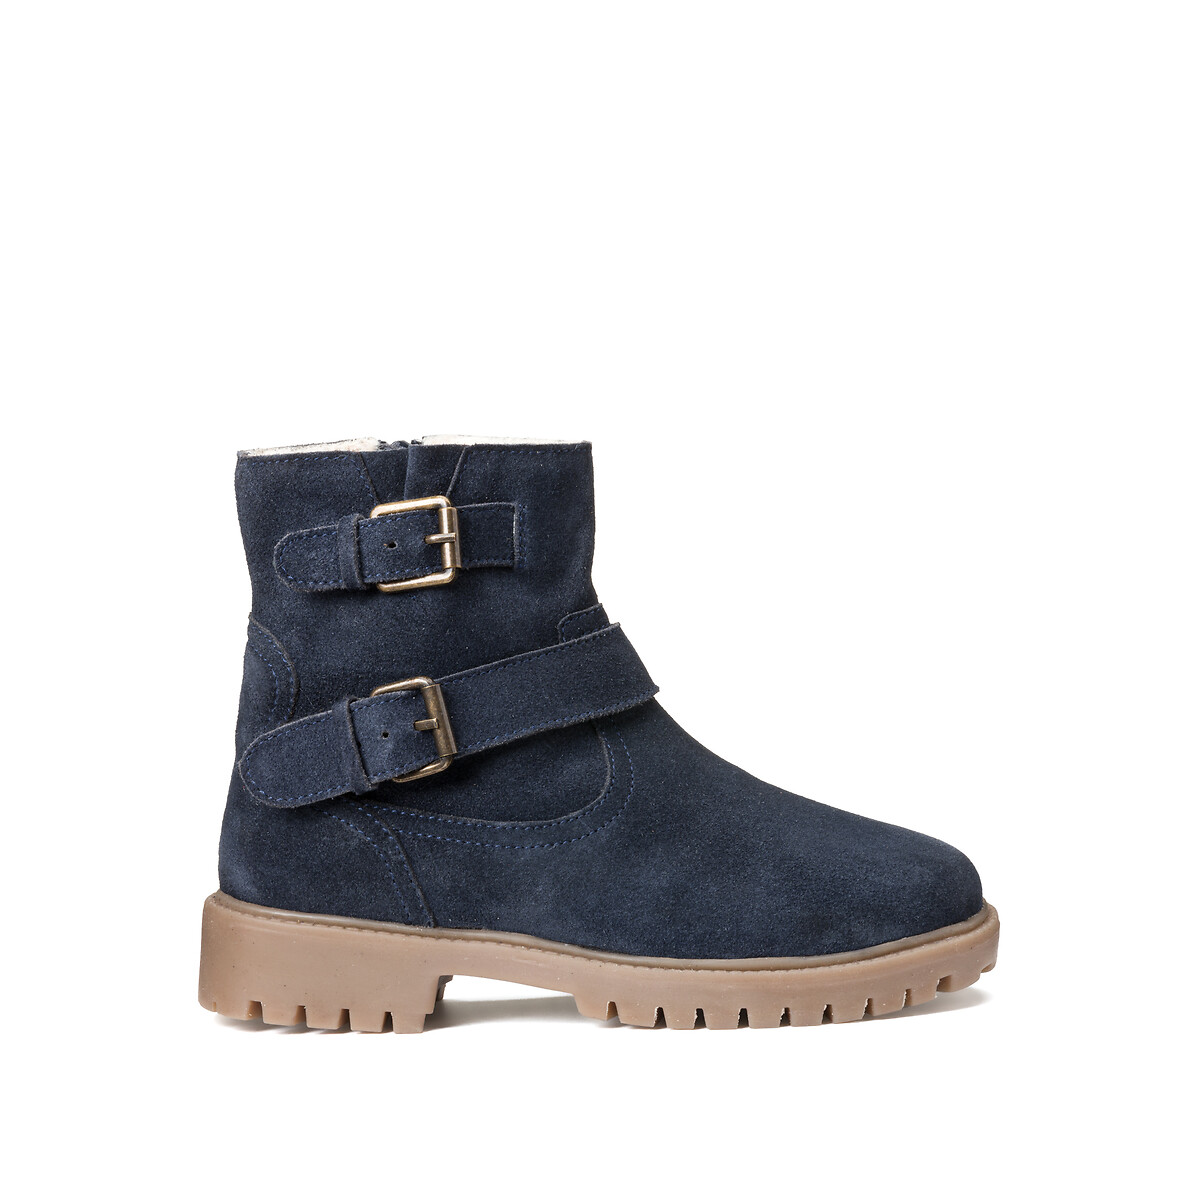 Kids Suede Ankle Boots with Buckles